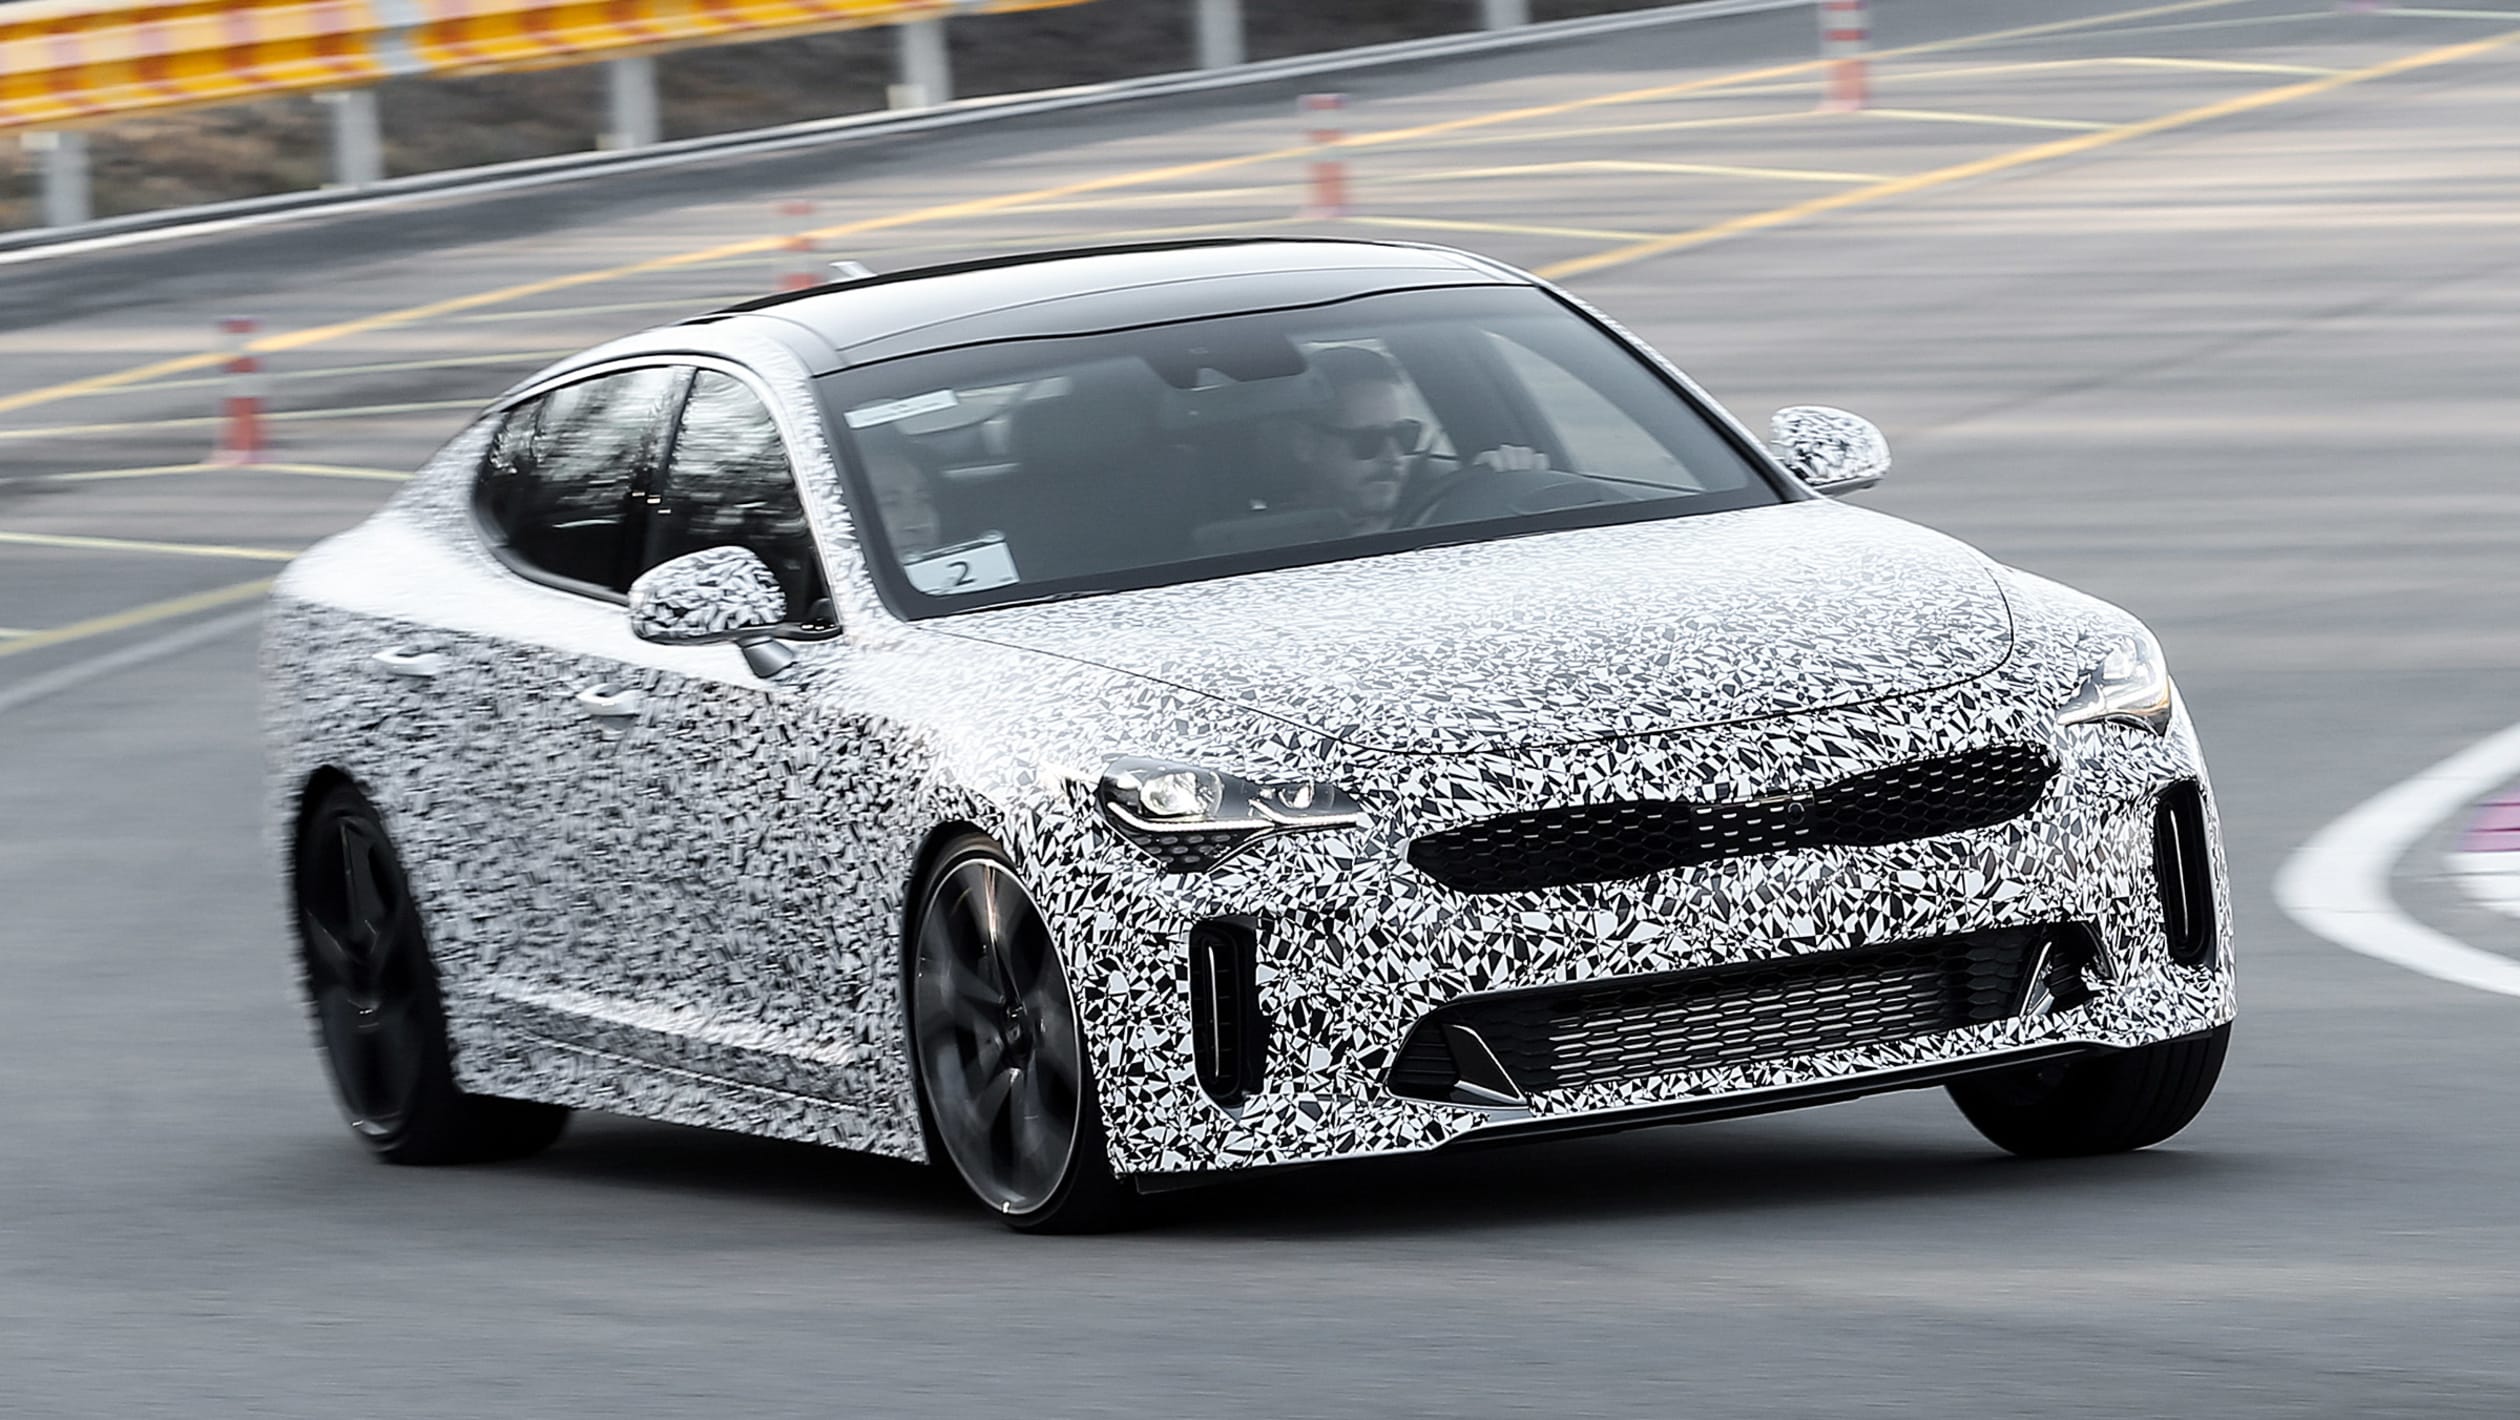 Kia Stinger GT reveal and drive - pictures | Auto Express